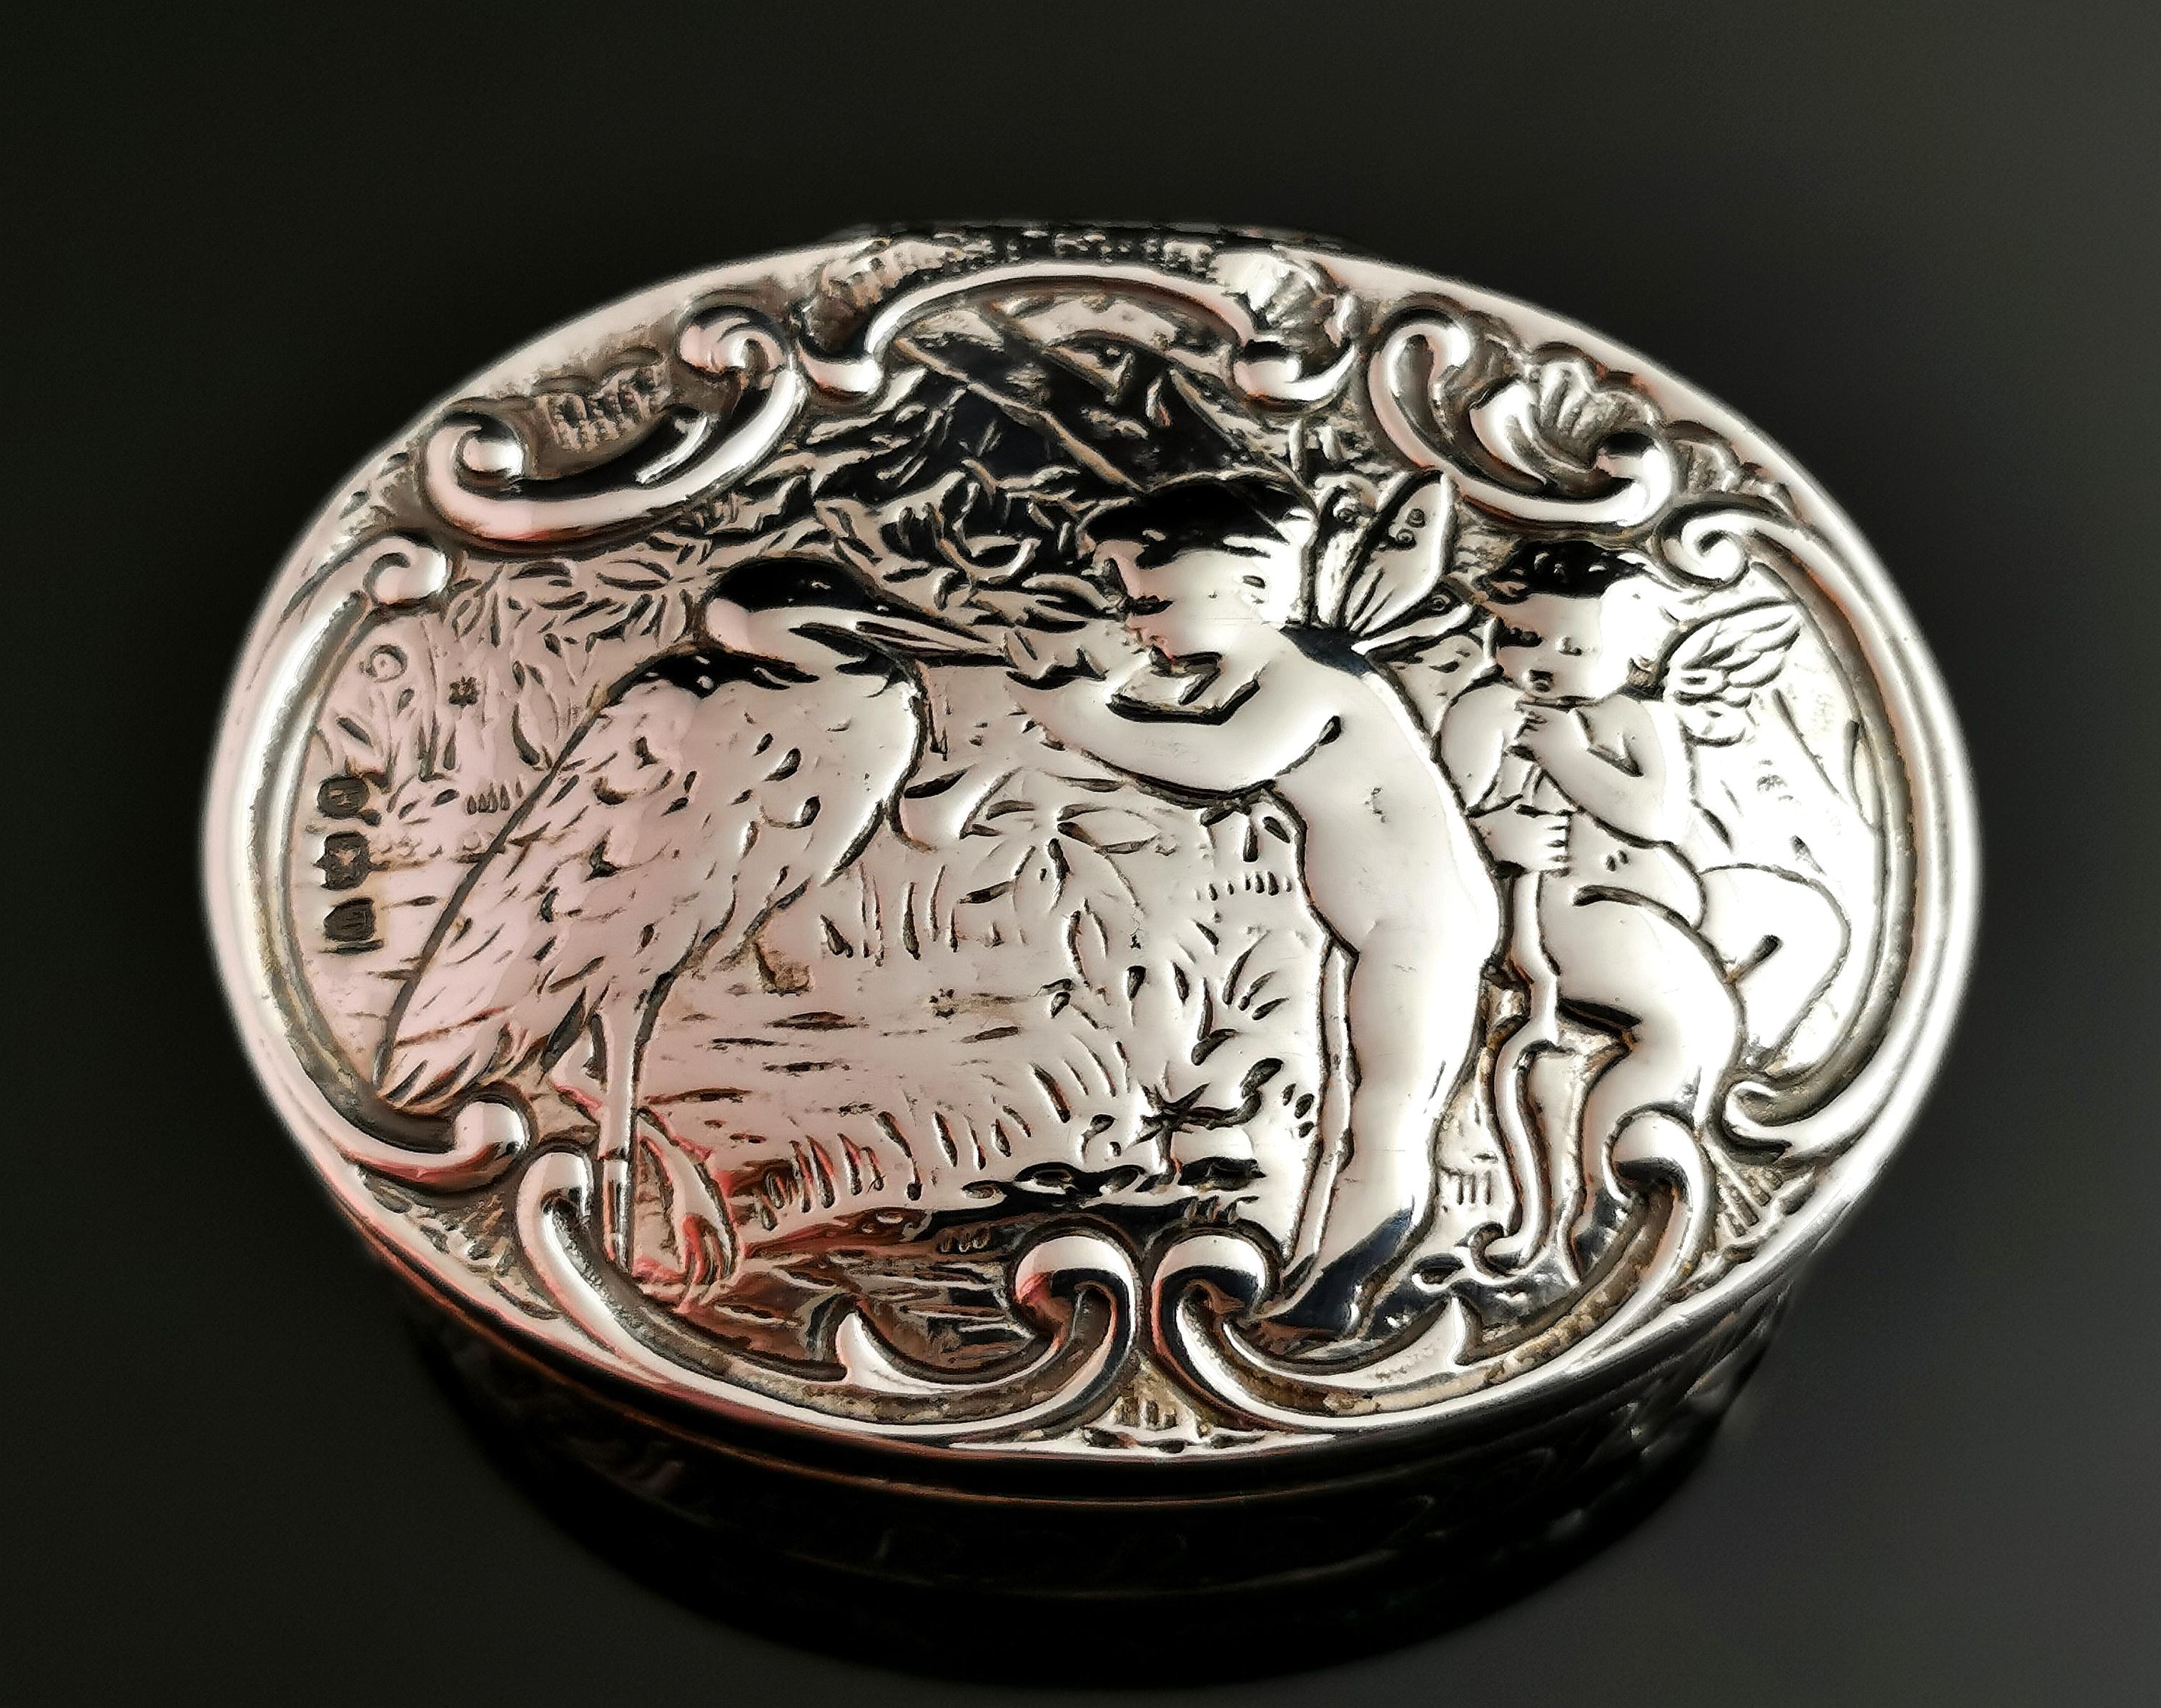 A beautiful antique, Victorian sterling silver snuff box.

Oval shaped box with decorative shaped and engraved sides, the lid of the box features a pretty scene of two fairies and a stork in woodland.

Very fine box with great attention to